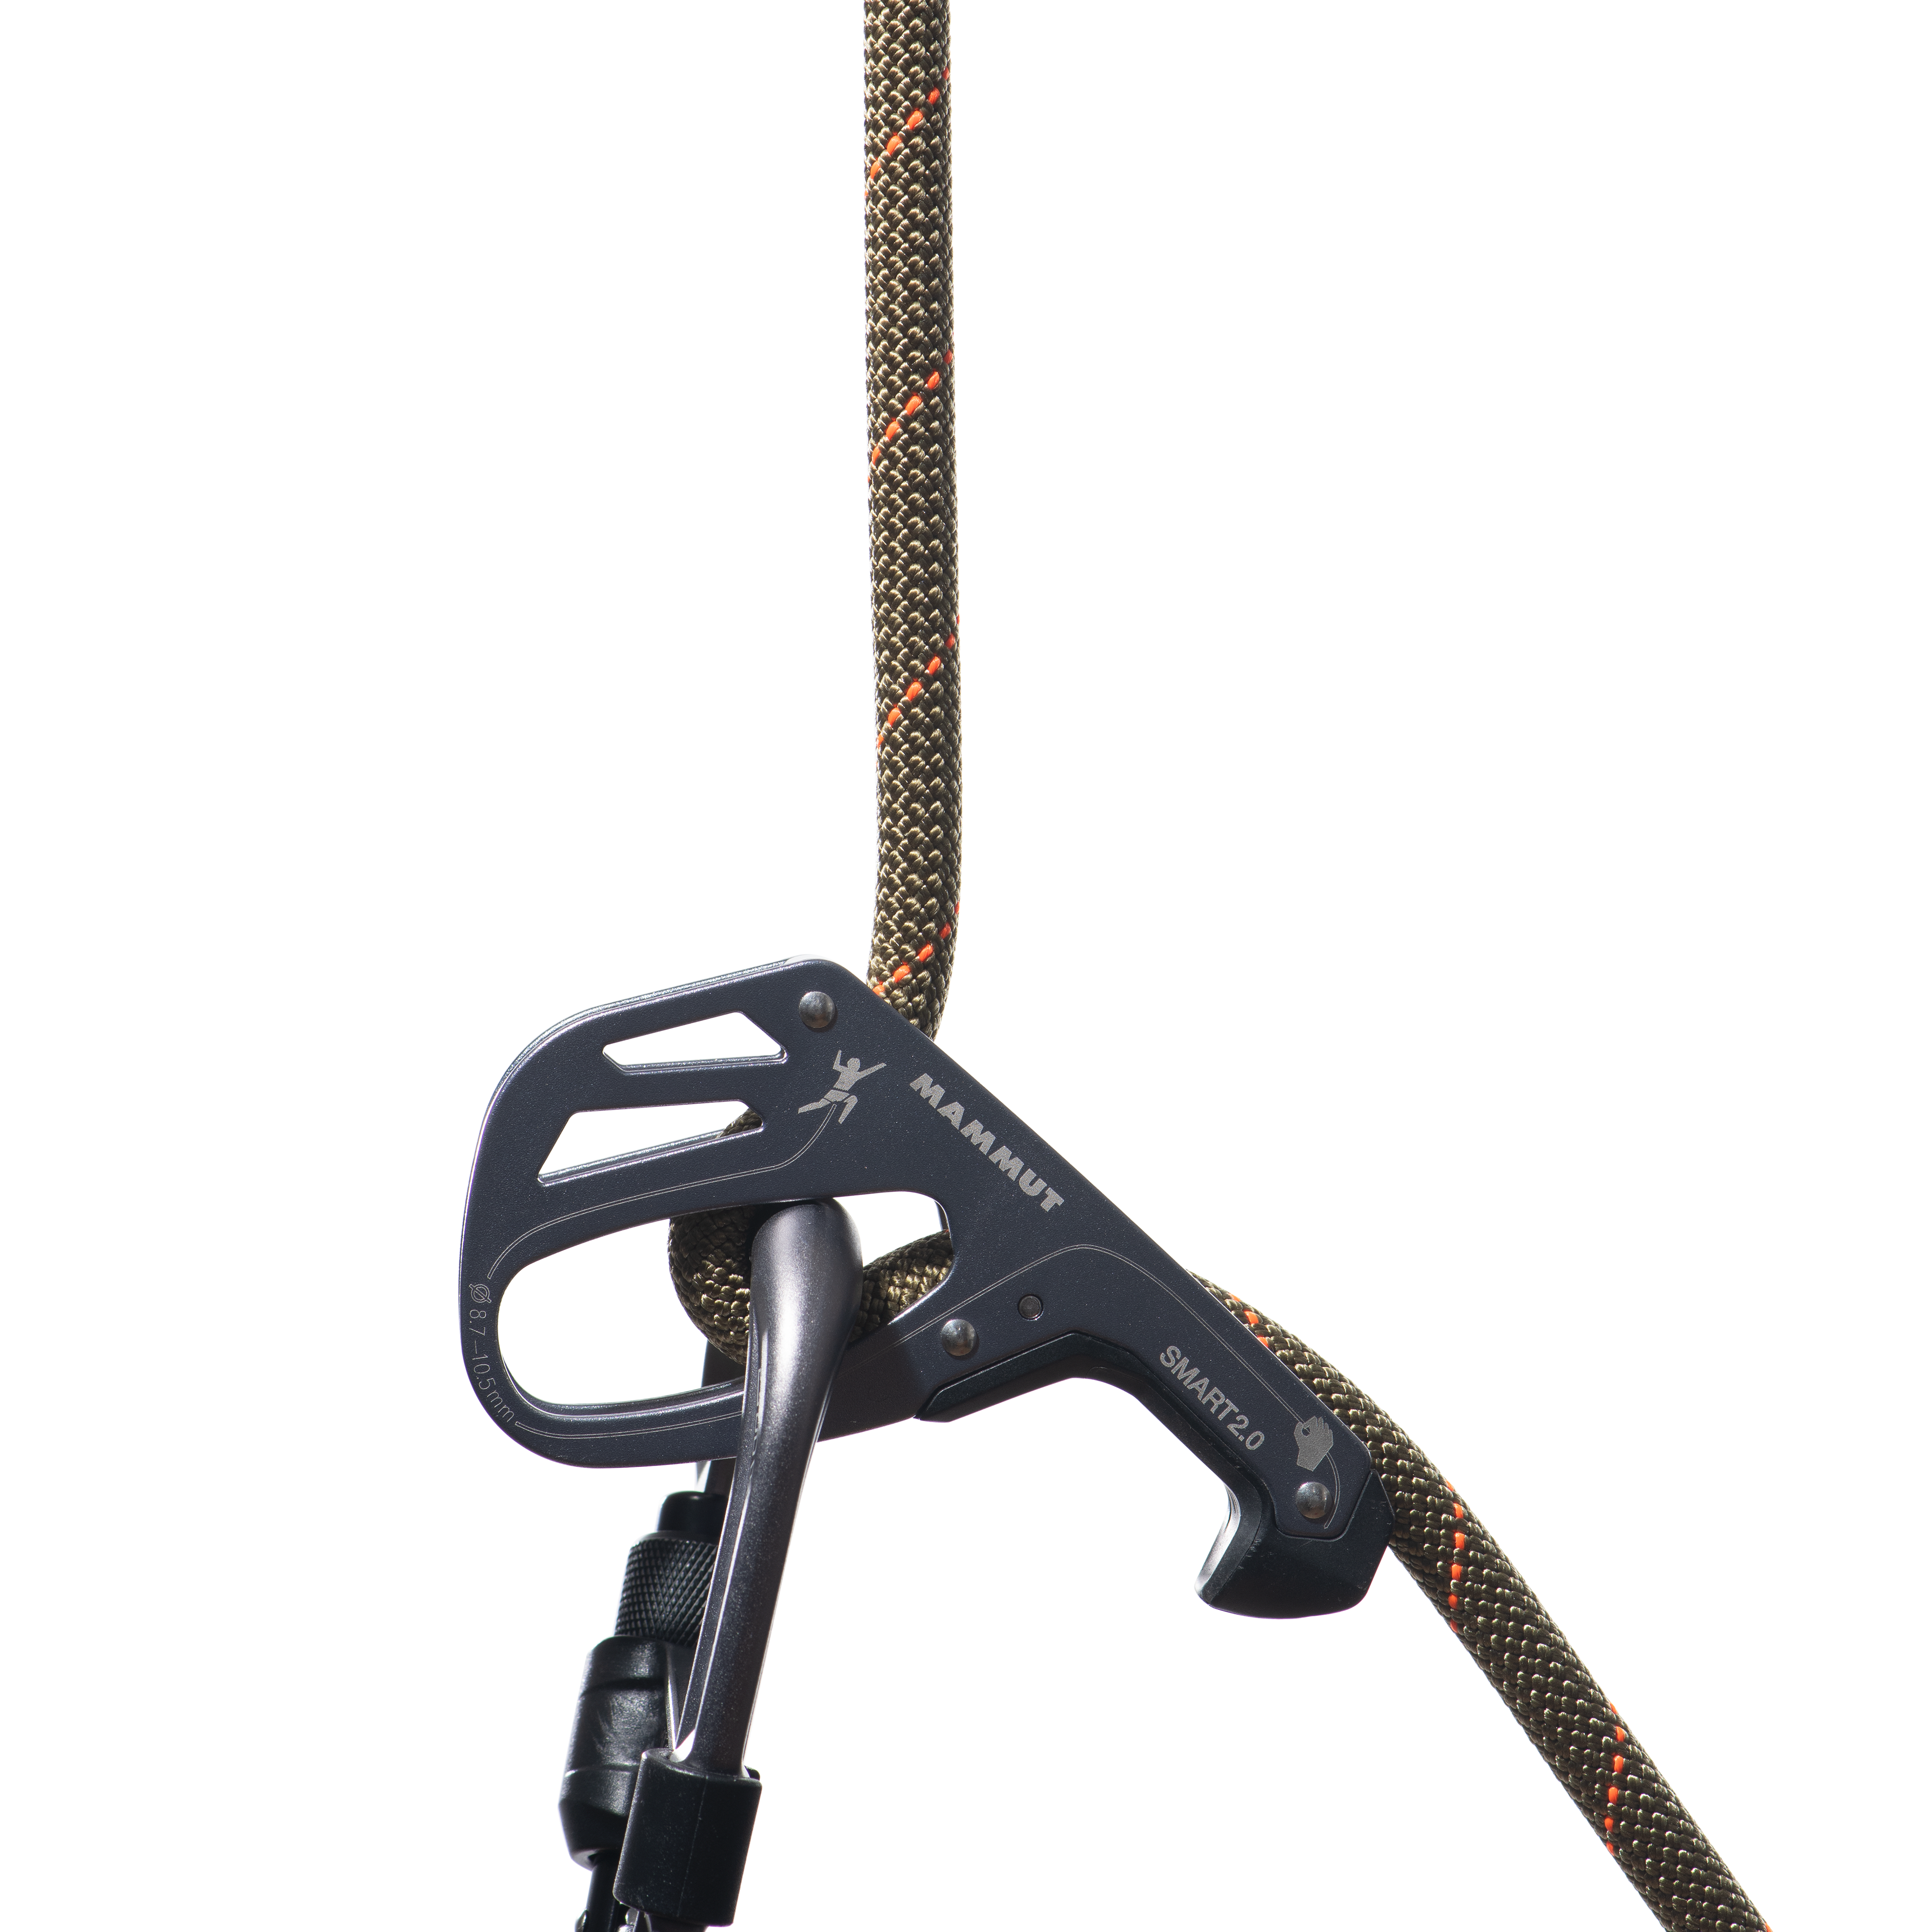 9.9 Gym Workhorse Classic Rope product image